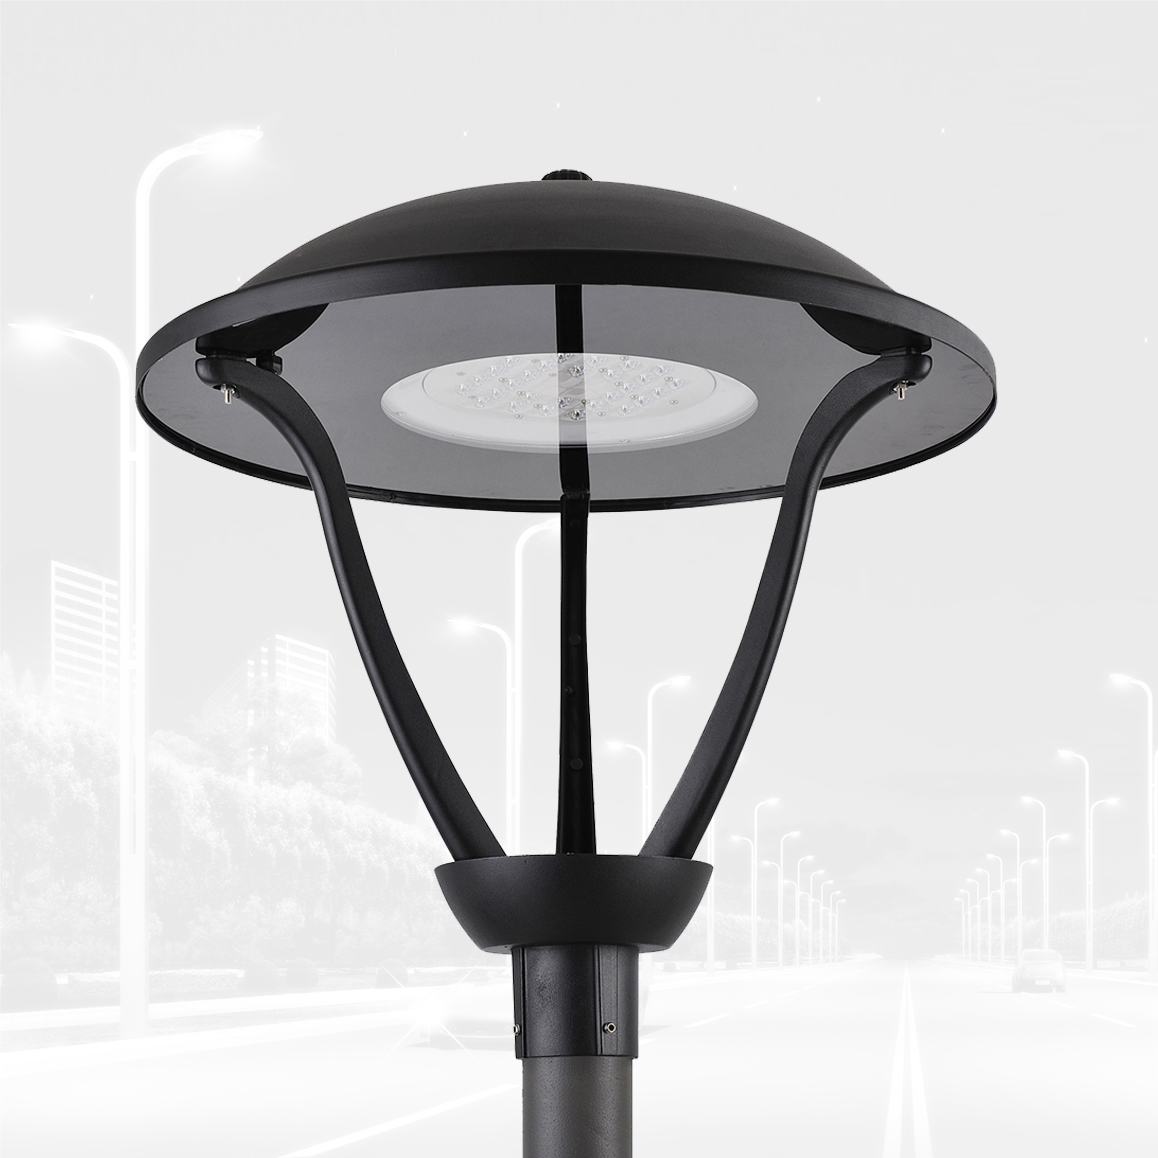 Ymled6115 outdoor parking led post top armaturen